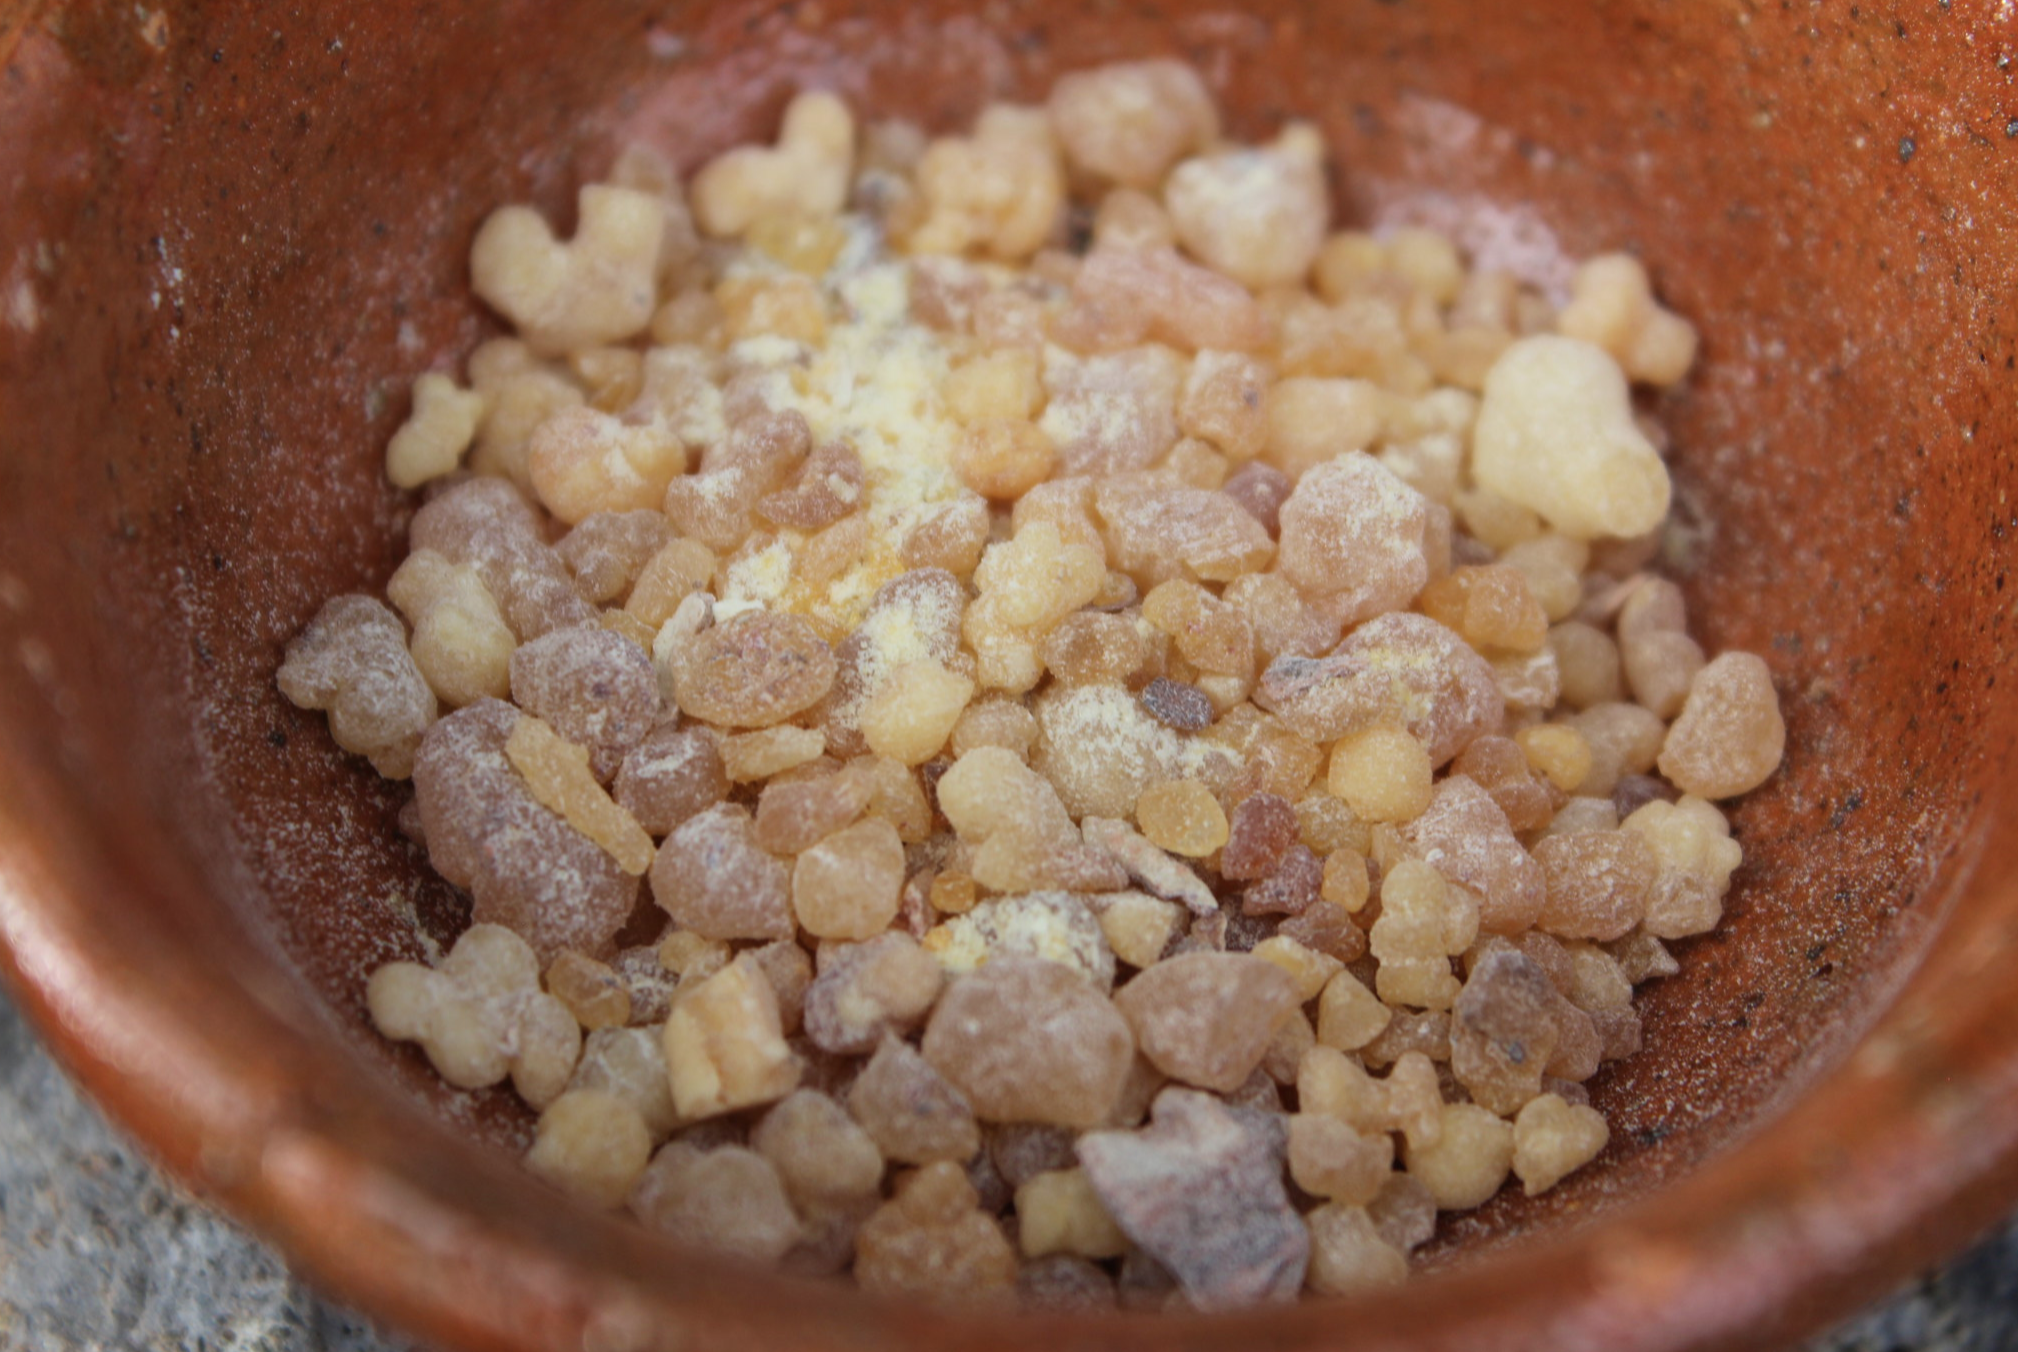 Frankincense resin of the Boswellia tree